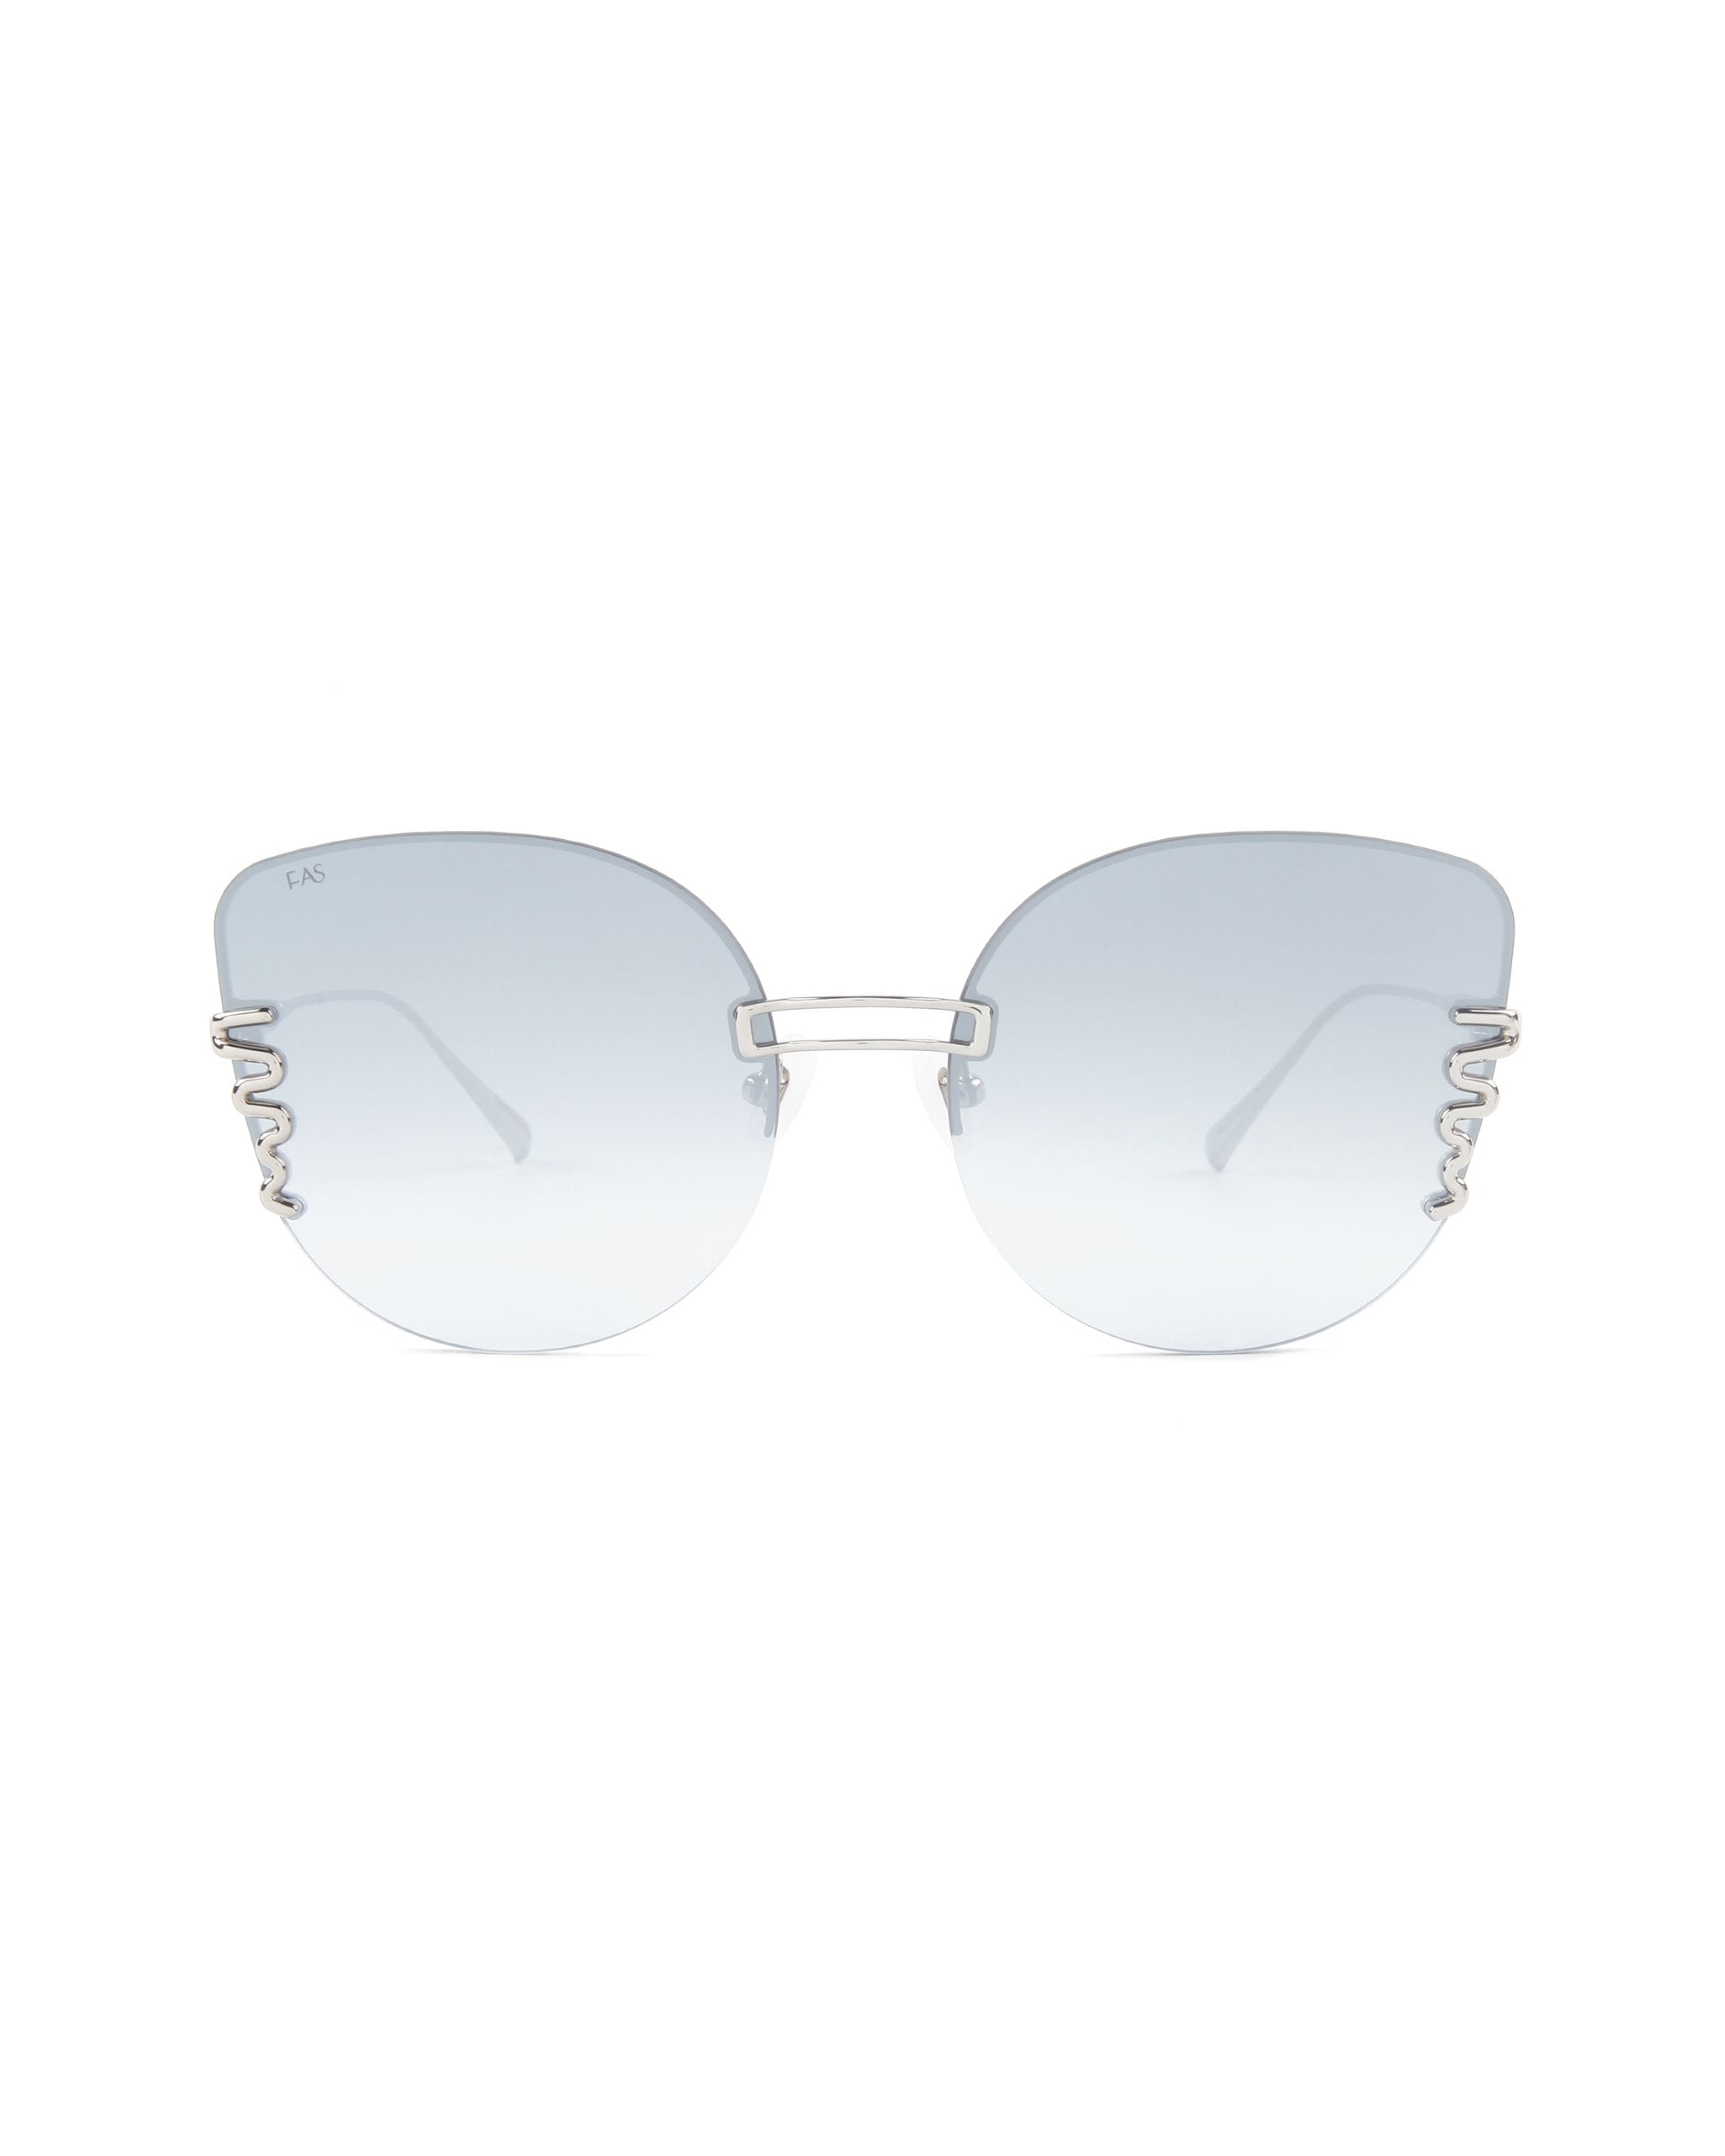 A pair of stylish oversized cat-eye sunglasses with large, lightly tinted blue lenses and a silver metal frame. The temples feature a delicate and intricate cut-out design. The overall look is modern and elegant, complemented by adjustable nosepads for a comfortable fit. Introducing Girlboss by For Art's Sake®.